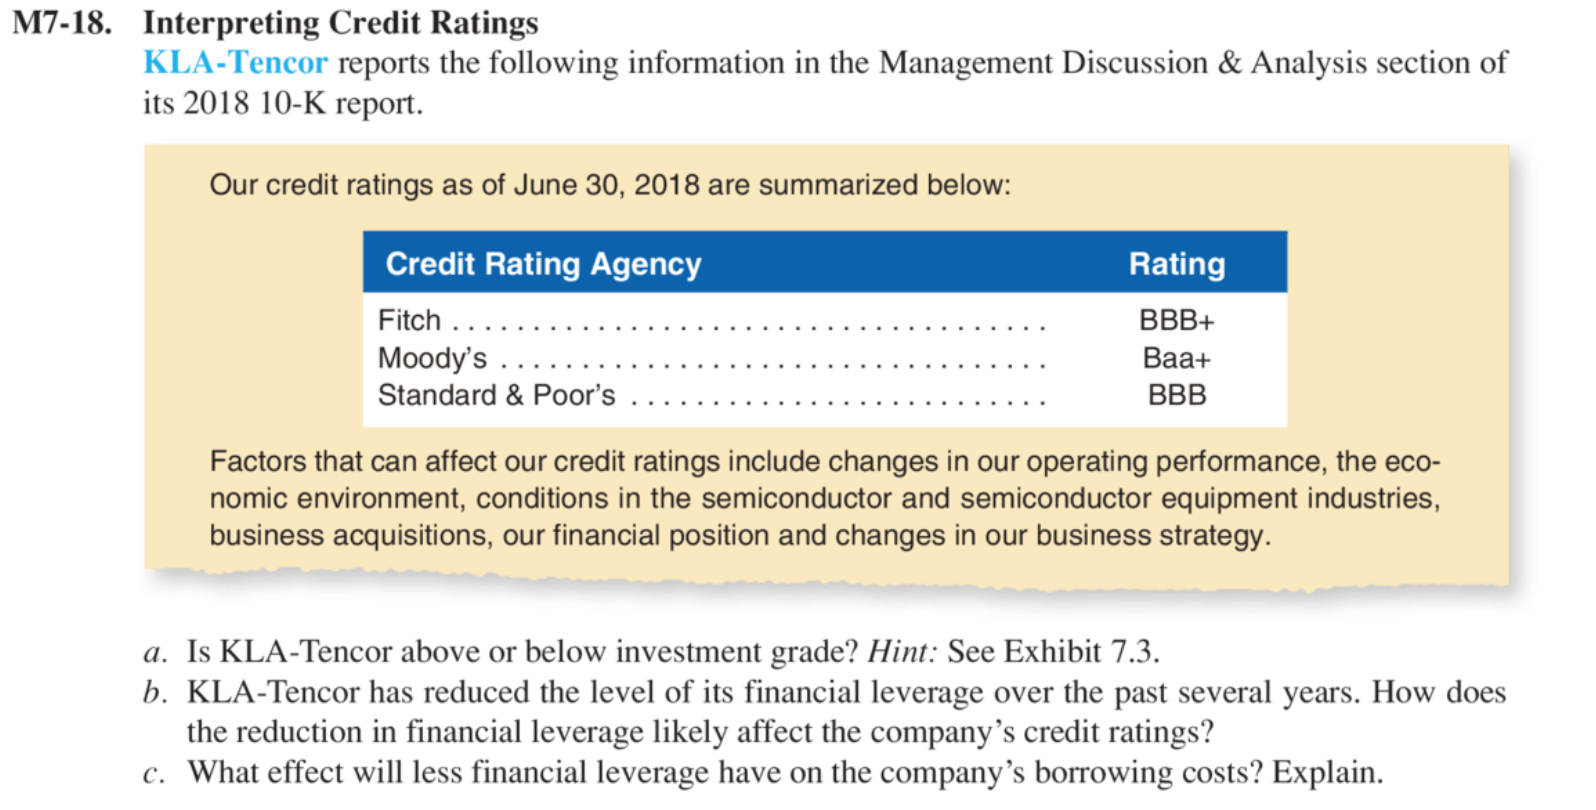 Birkenstock Assigned Preliminary 'B' Rating From S&P Following L